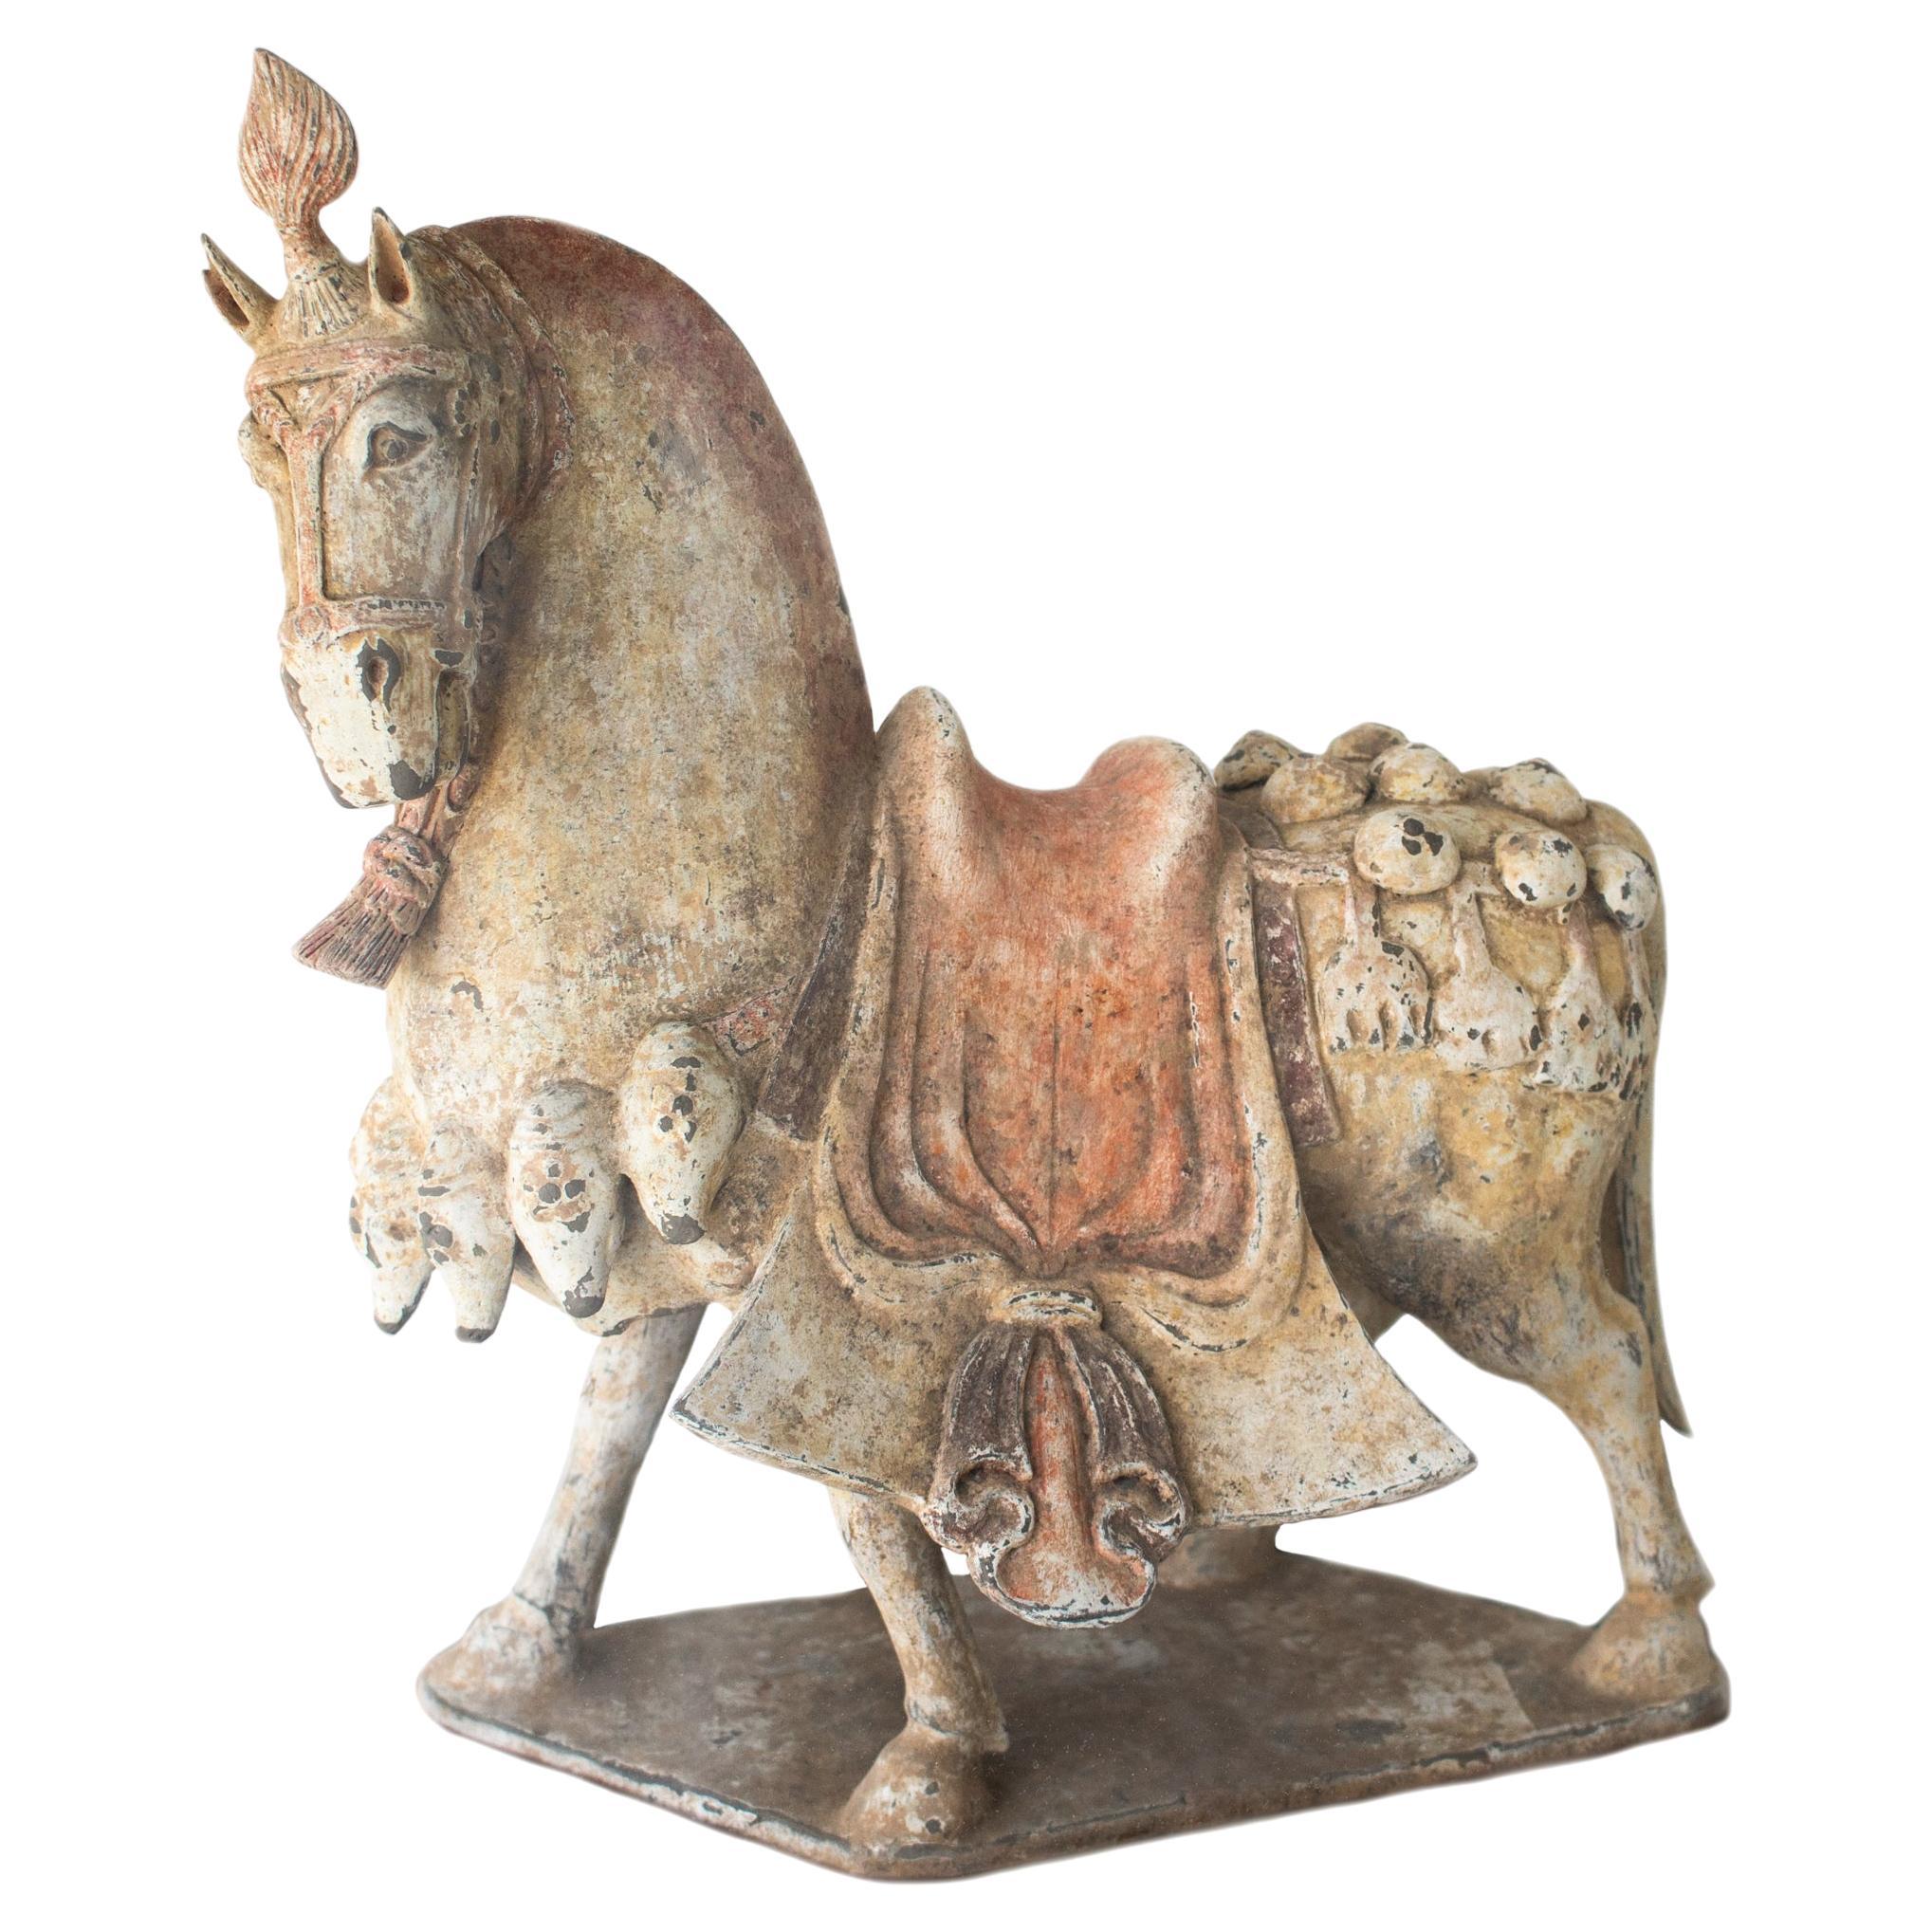 China 549-577 AD Northern Qi Dynasty Ancient Caparisoned Horse In Earthenware For Sale